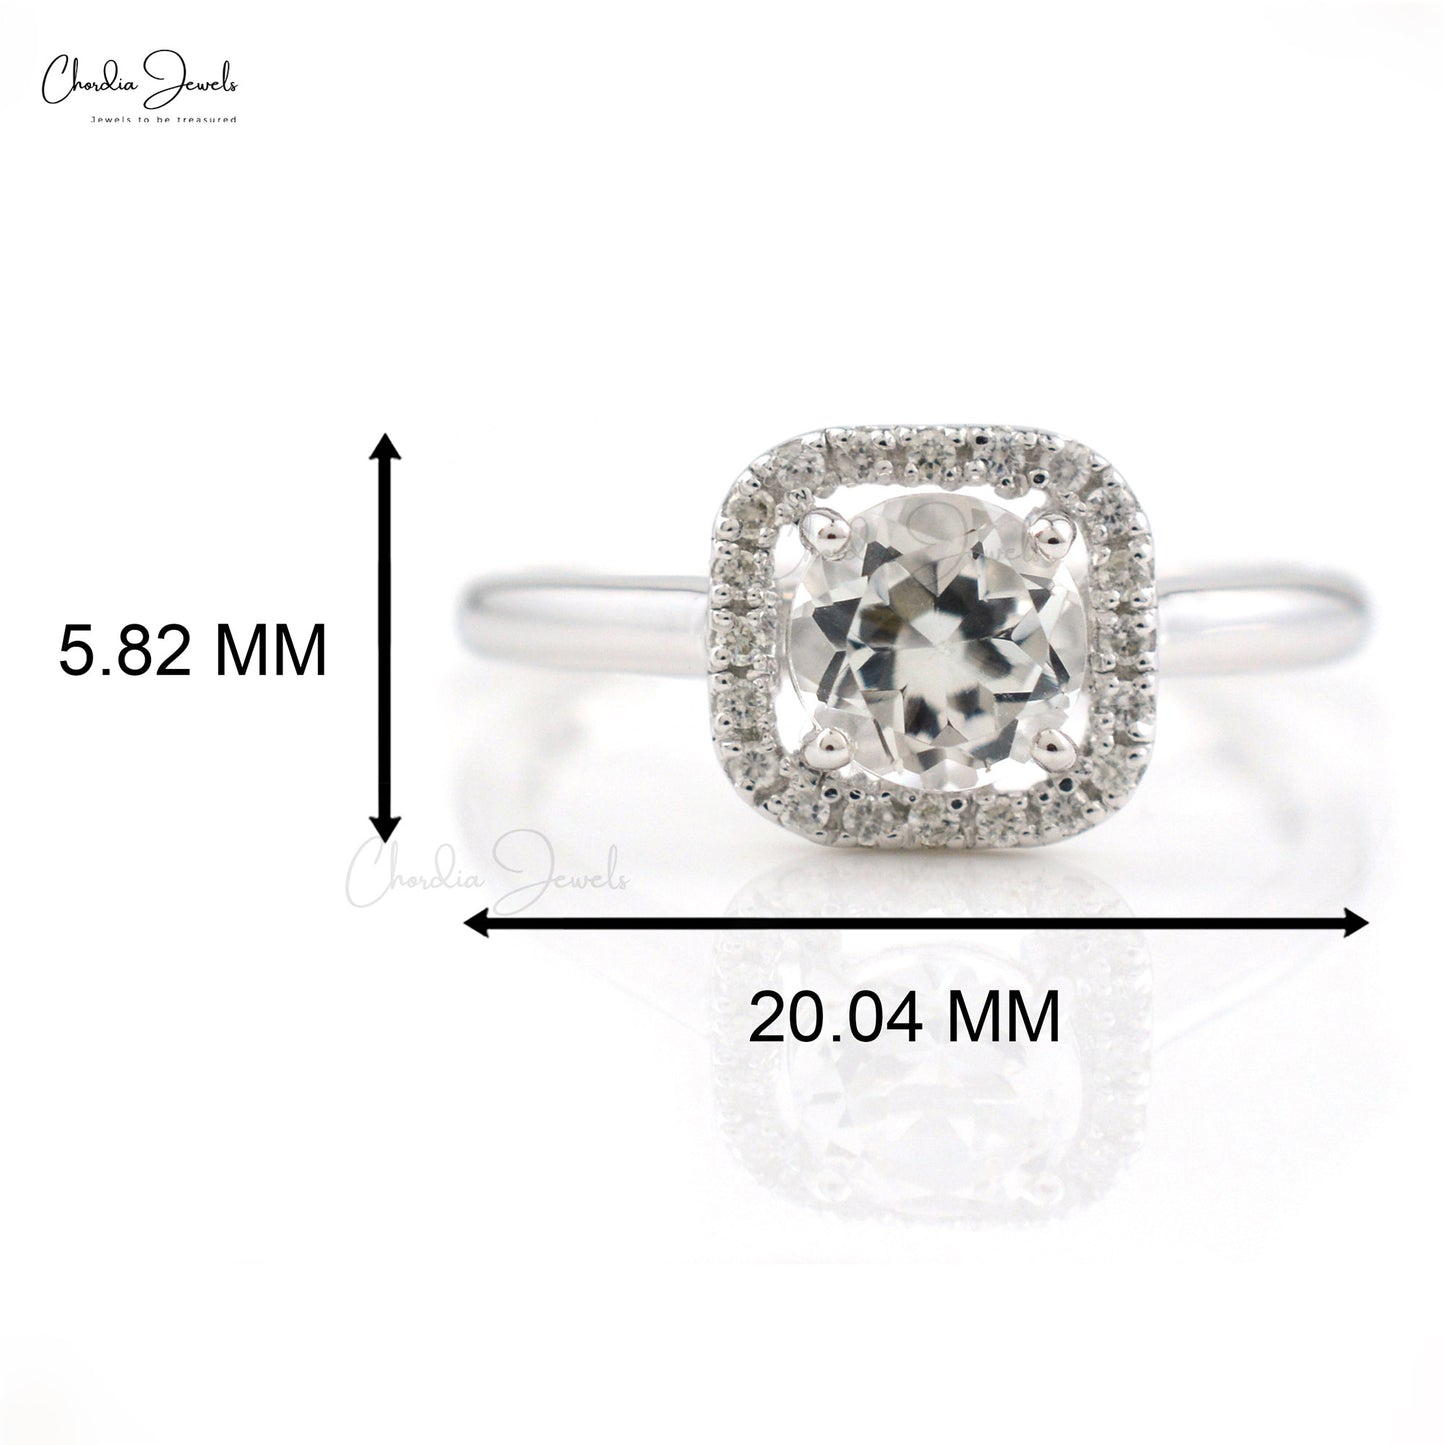 1/2 carat white topaz halo ring in high finish silver